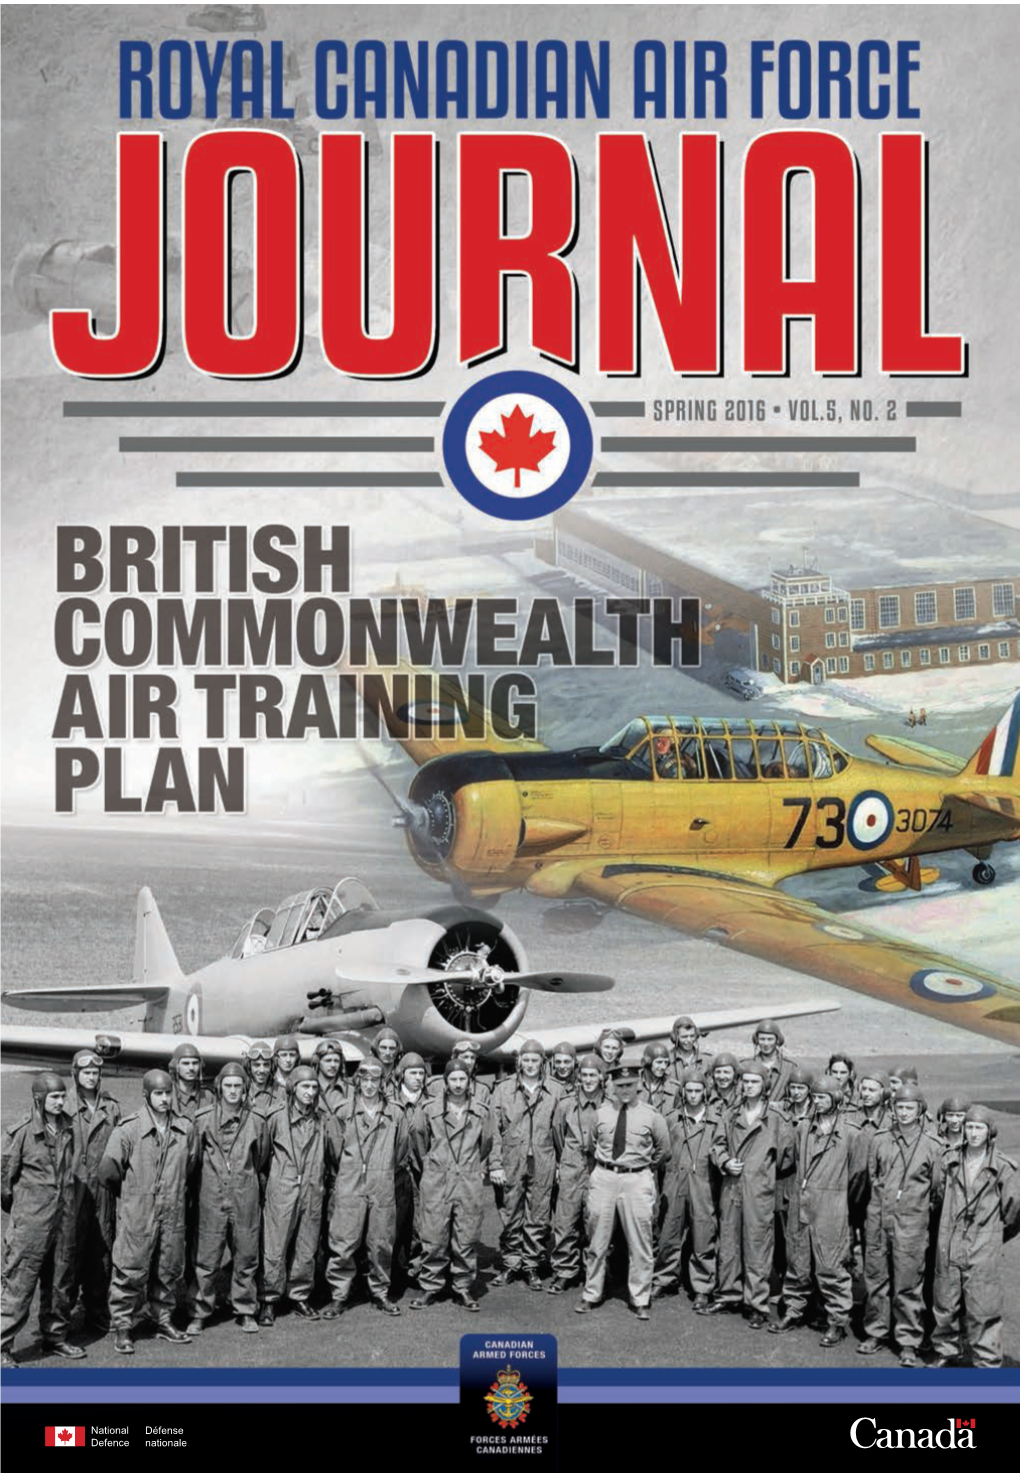 ROYAL CANADIAN AIR FORCE JOURNAL Is an Official Publication of the Commander Royal Canadian Air Force (RCAF) and Is Published Quarterly